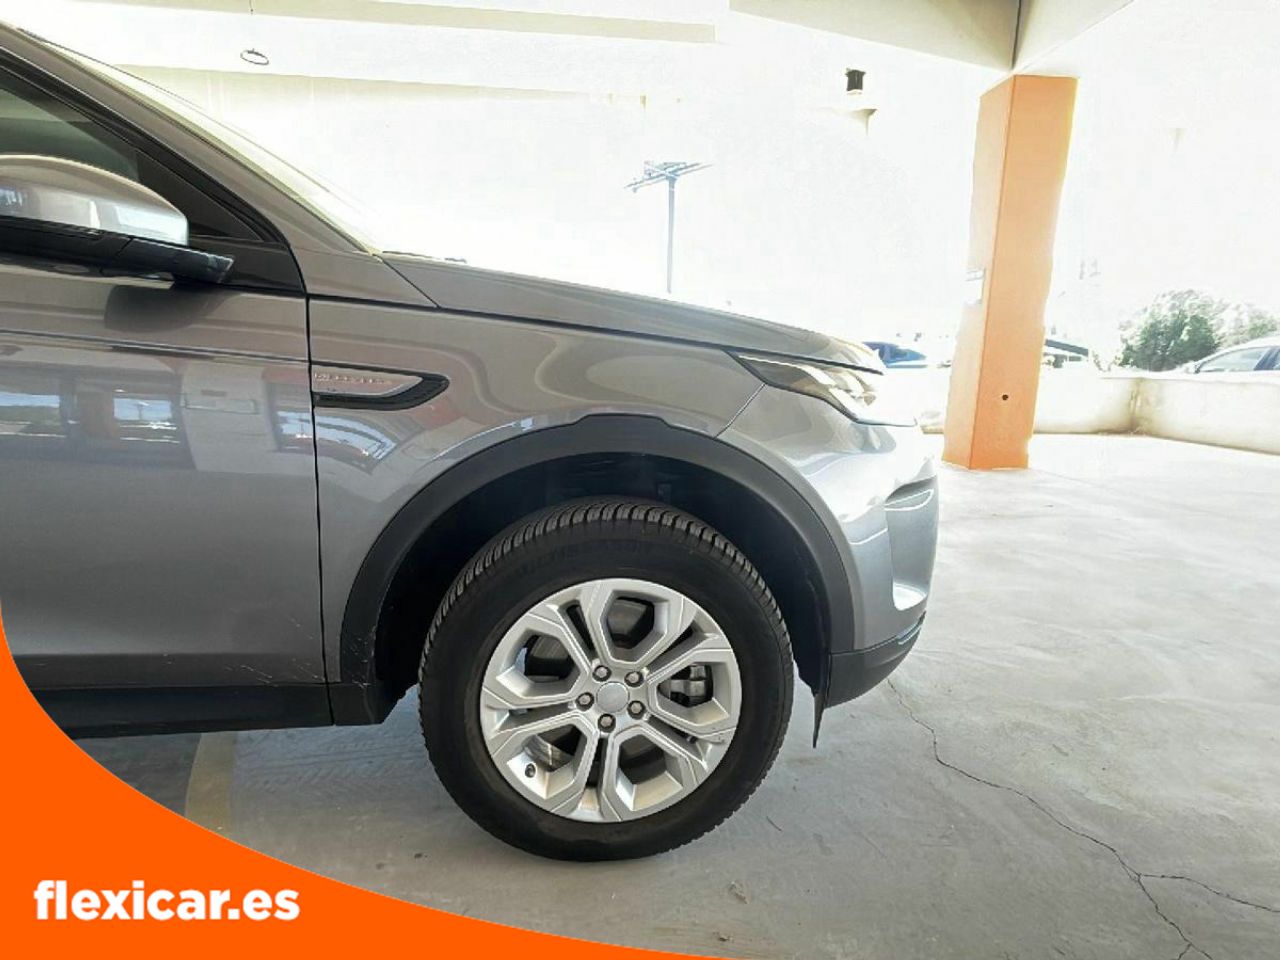 Foto Land-Rover Discovery Sport 20